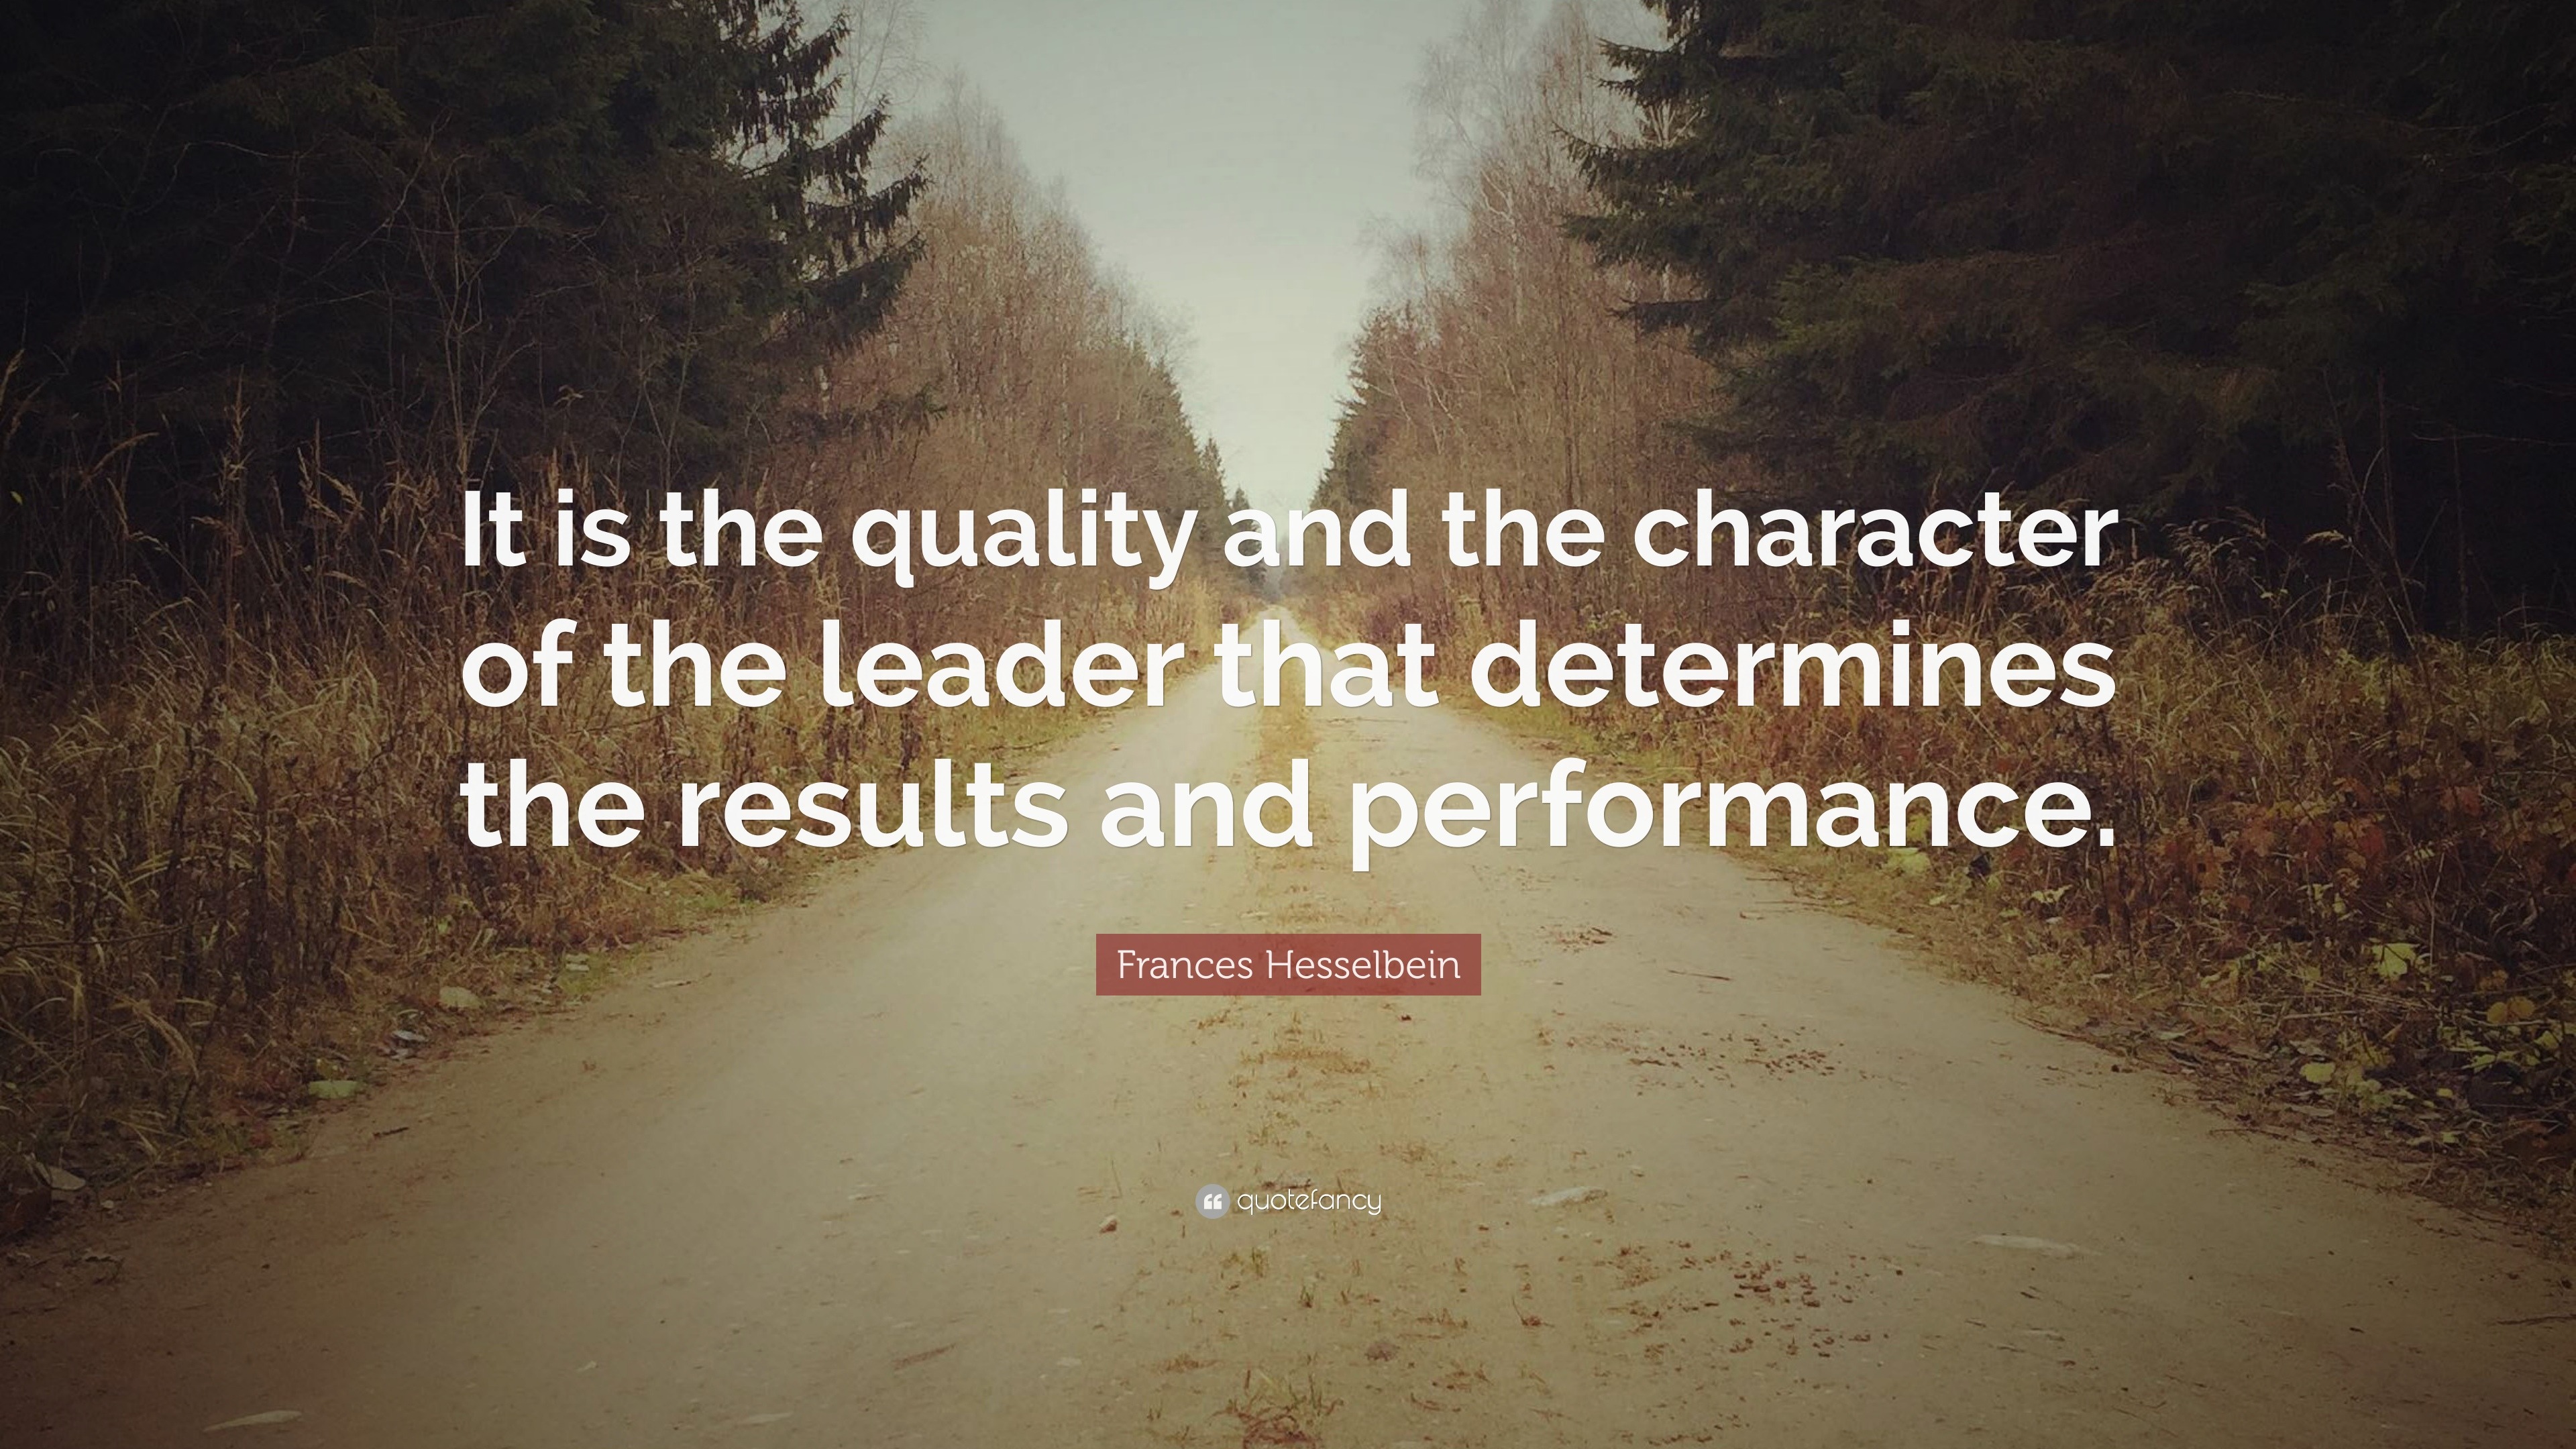 Frances Hesselbein Quote: “It is the quality and the character of the ...